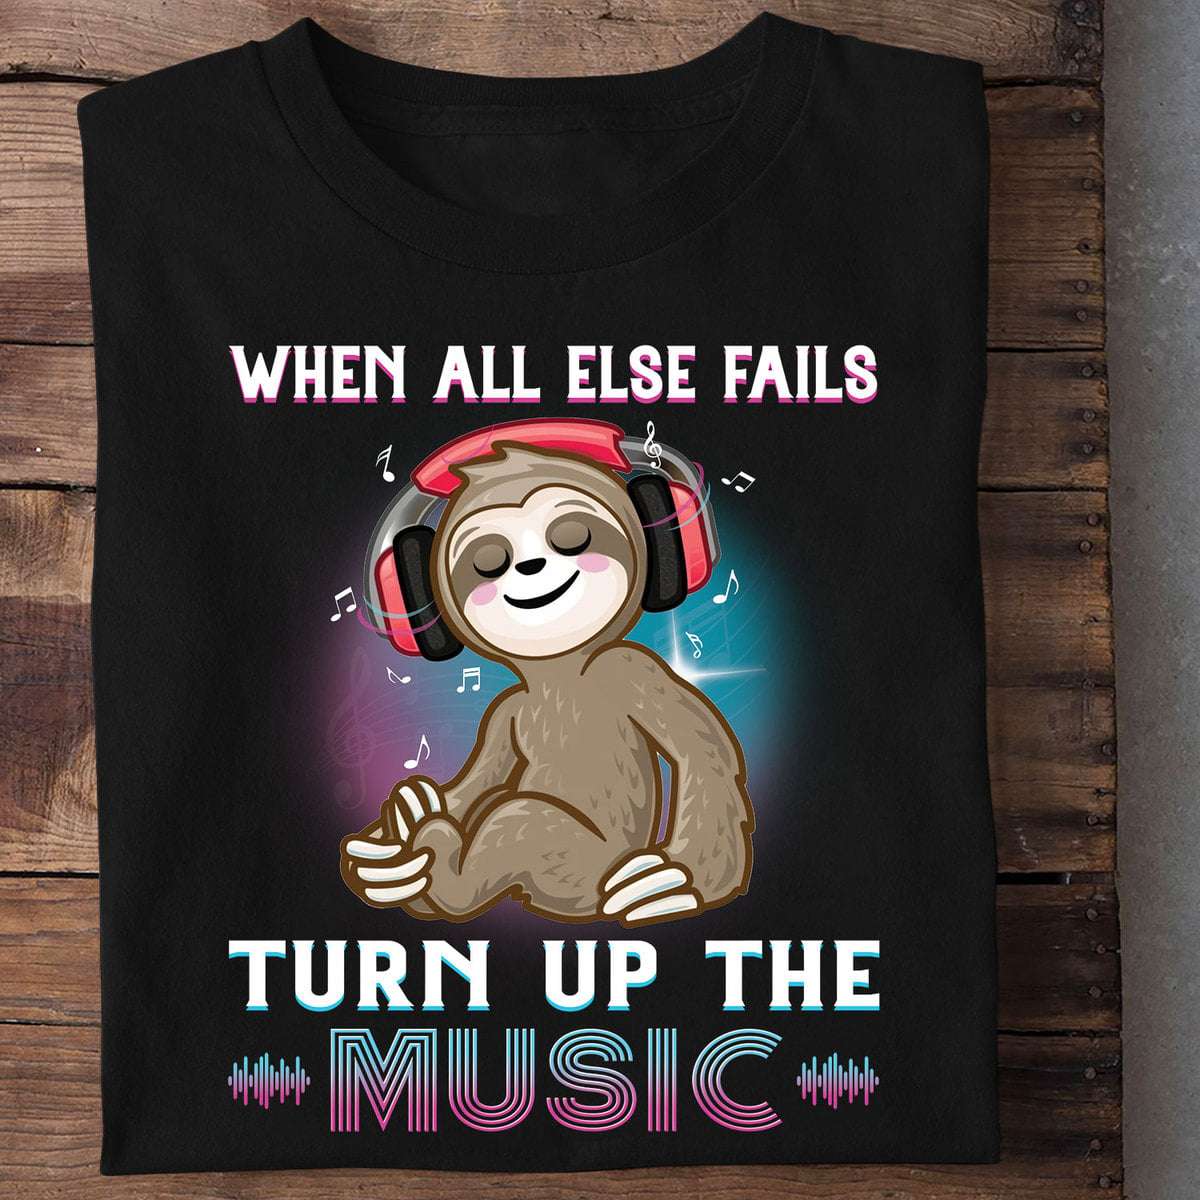 When all else fails, turn up the music - Sloth listen to music, sloth and music lover